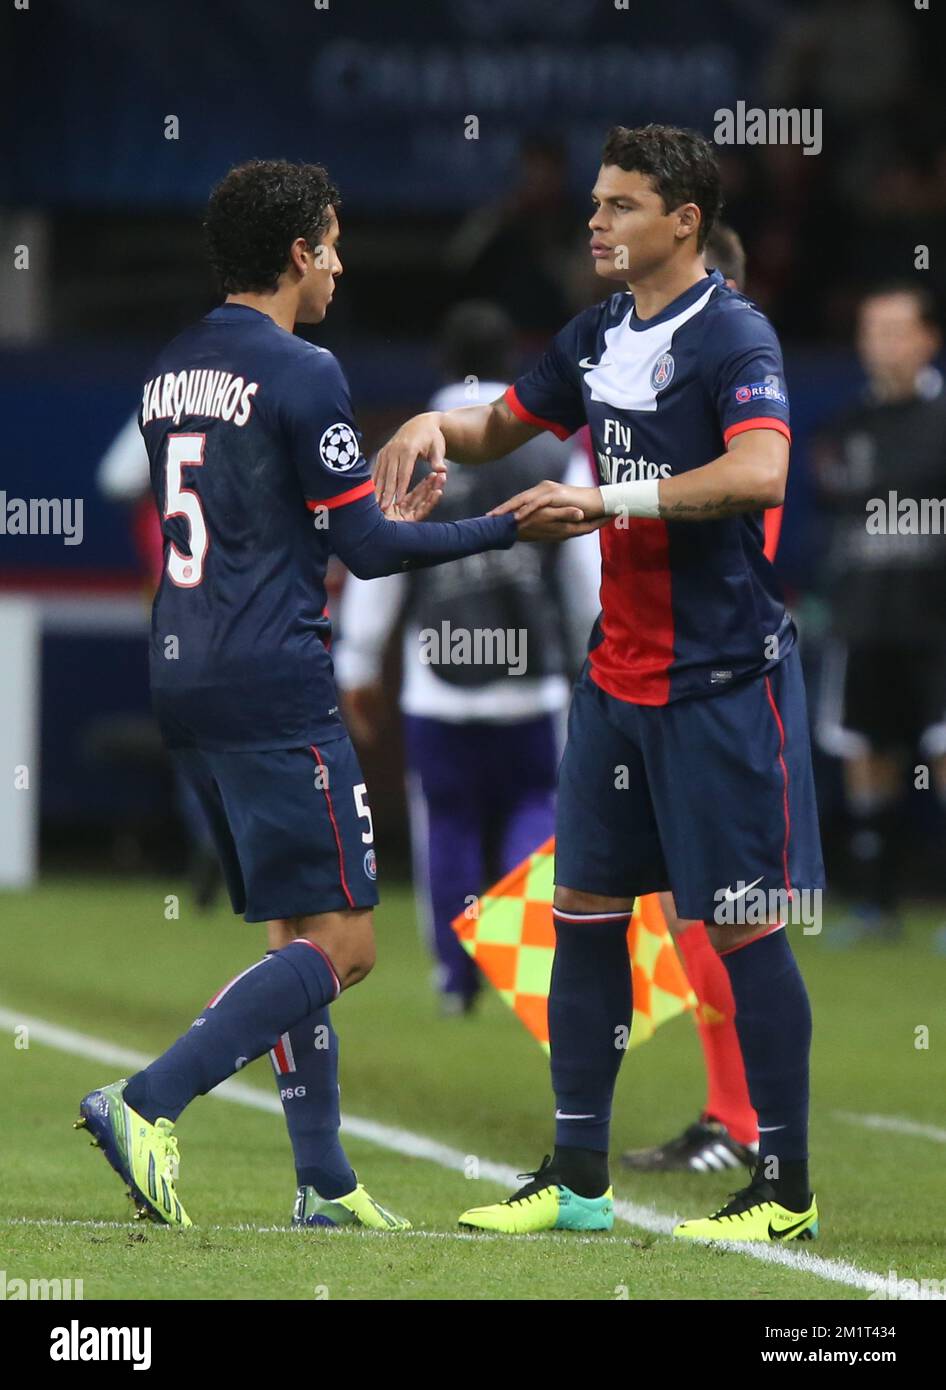 20131105 - PARIS, FRANCE: PSG's Marquinhos and PSG's Thiago Silva pictured during the match between French team PSG (Paris Saint-Germain) and Belgian RSC Anderlecht, fourth match of the Champions League Group stage in group C, Tuesday 05 November 2013, in the Parc des Princes in Saint-Cloud, Paris. BELGA PHOTO VIRGINIE LEFOUR Stock Photo